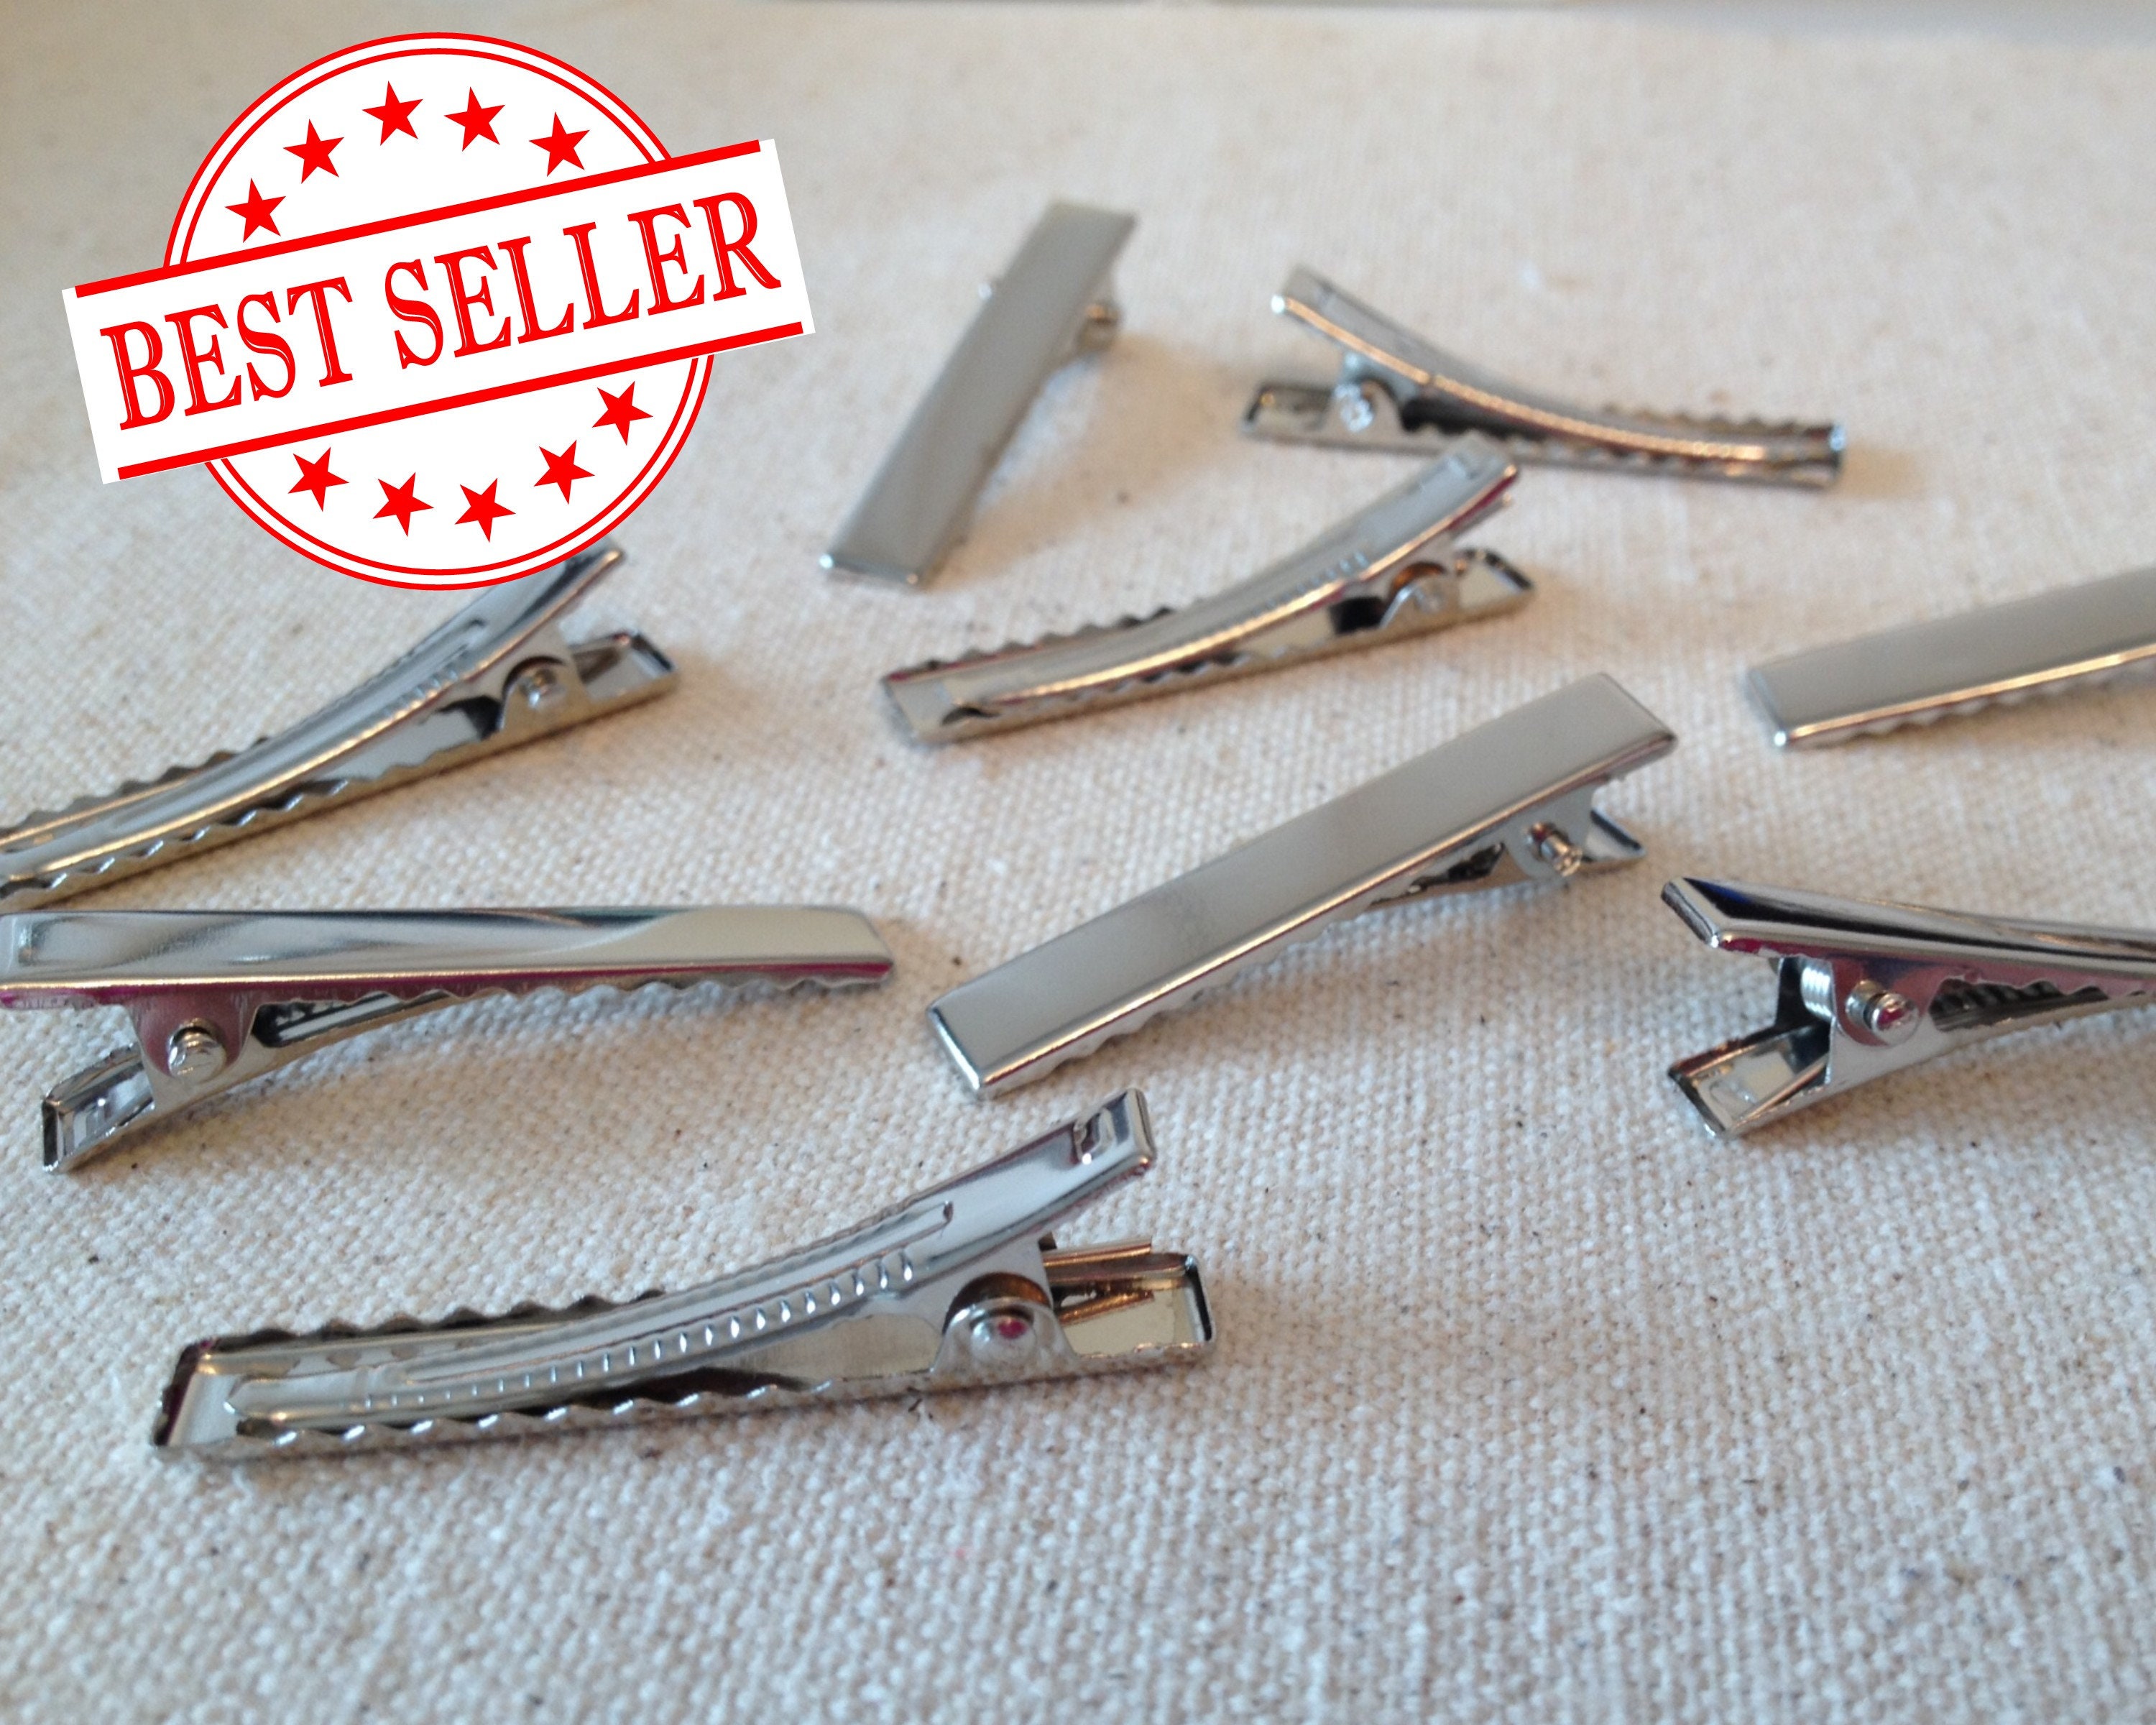 FOR BOWS WHOLESALE BULK PRICE ETC 1000 PCS..CURVED ALLIGATOR CLIPS WITH TEETH 